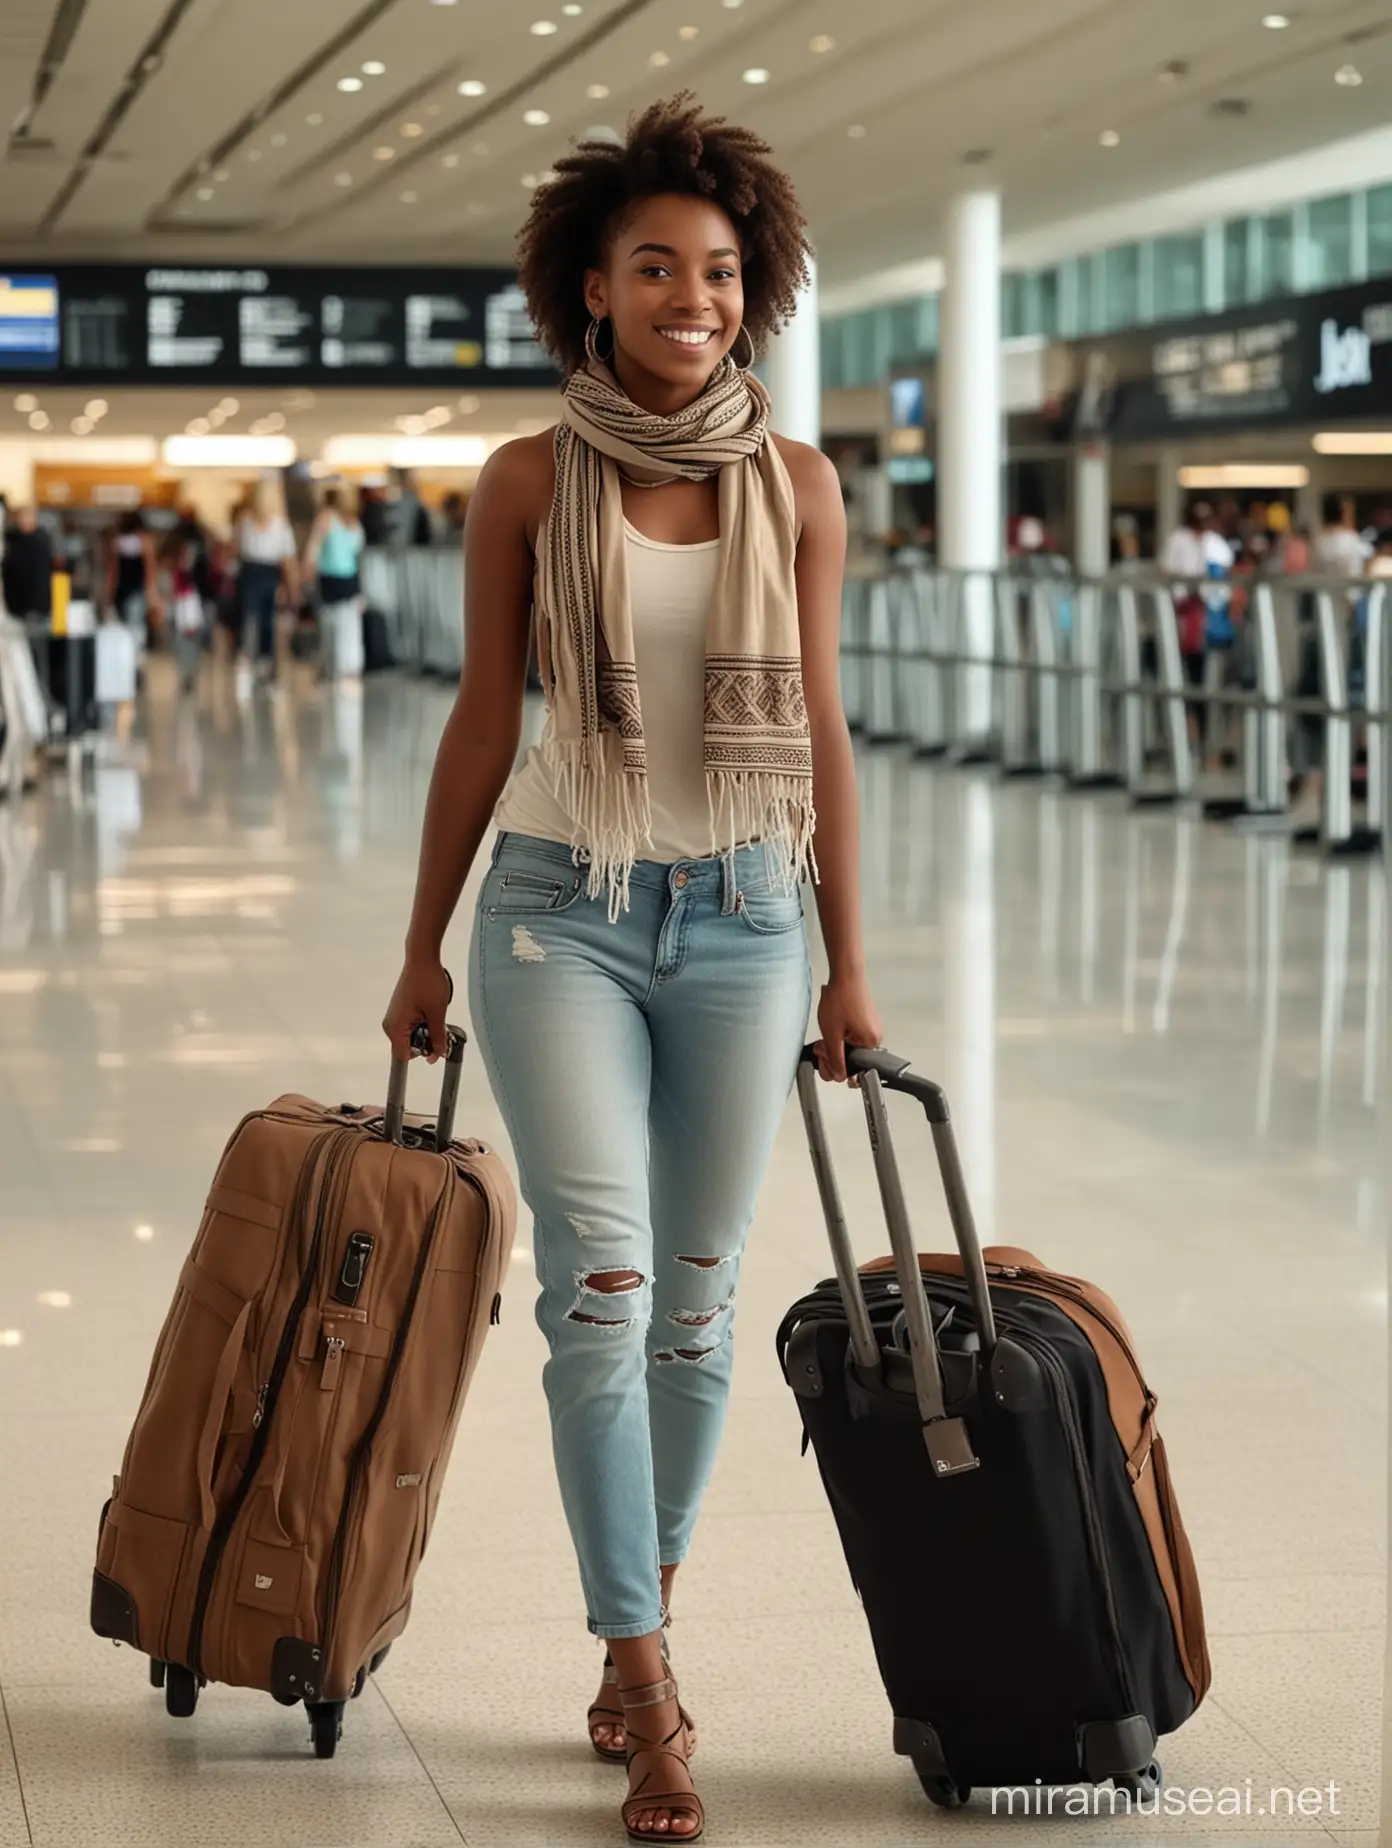 the beautiful carribean 20 yo woman wearing a sportwear and a elegant woman's scarf  walking walks inside the airport with his luggage,in the style of light brown and dark black, carribean influences, fashwave, candid celebrity shots, uhd image, body extensions, natural beauty --ar 69:128 --s 750 --v 5. 2